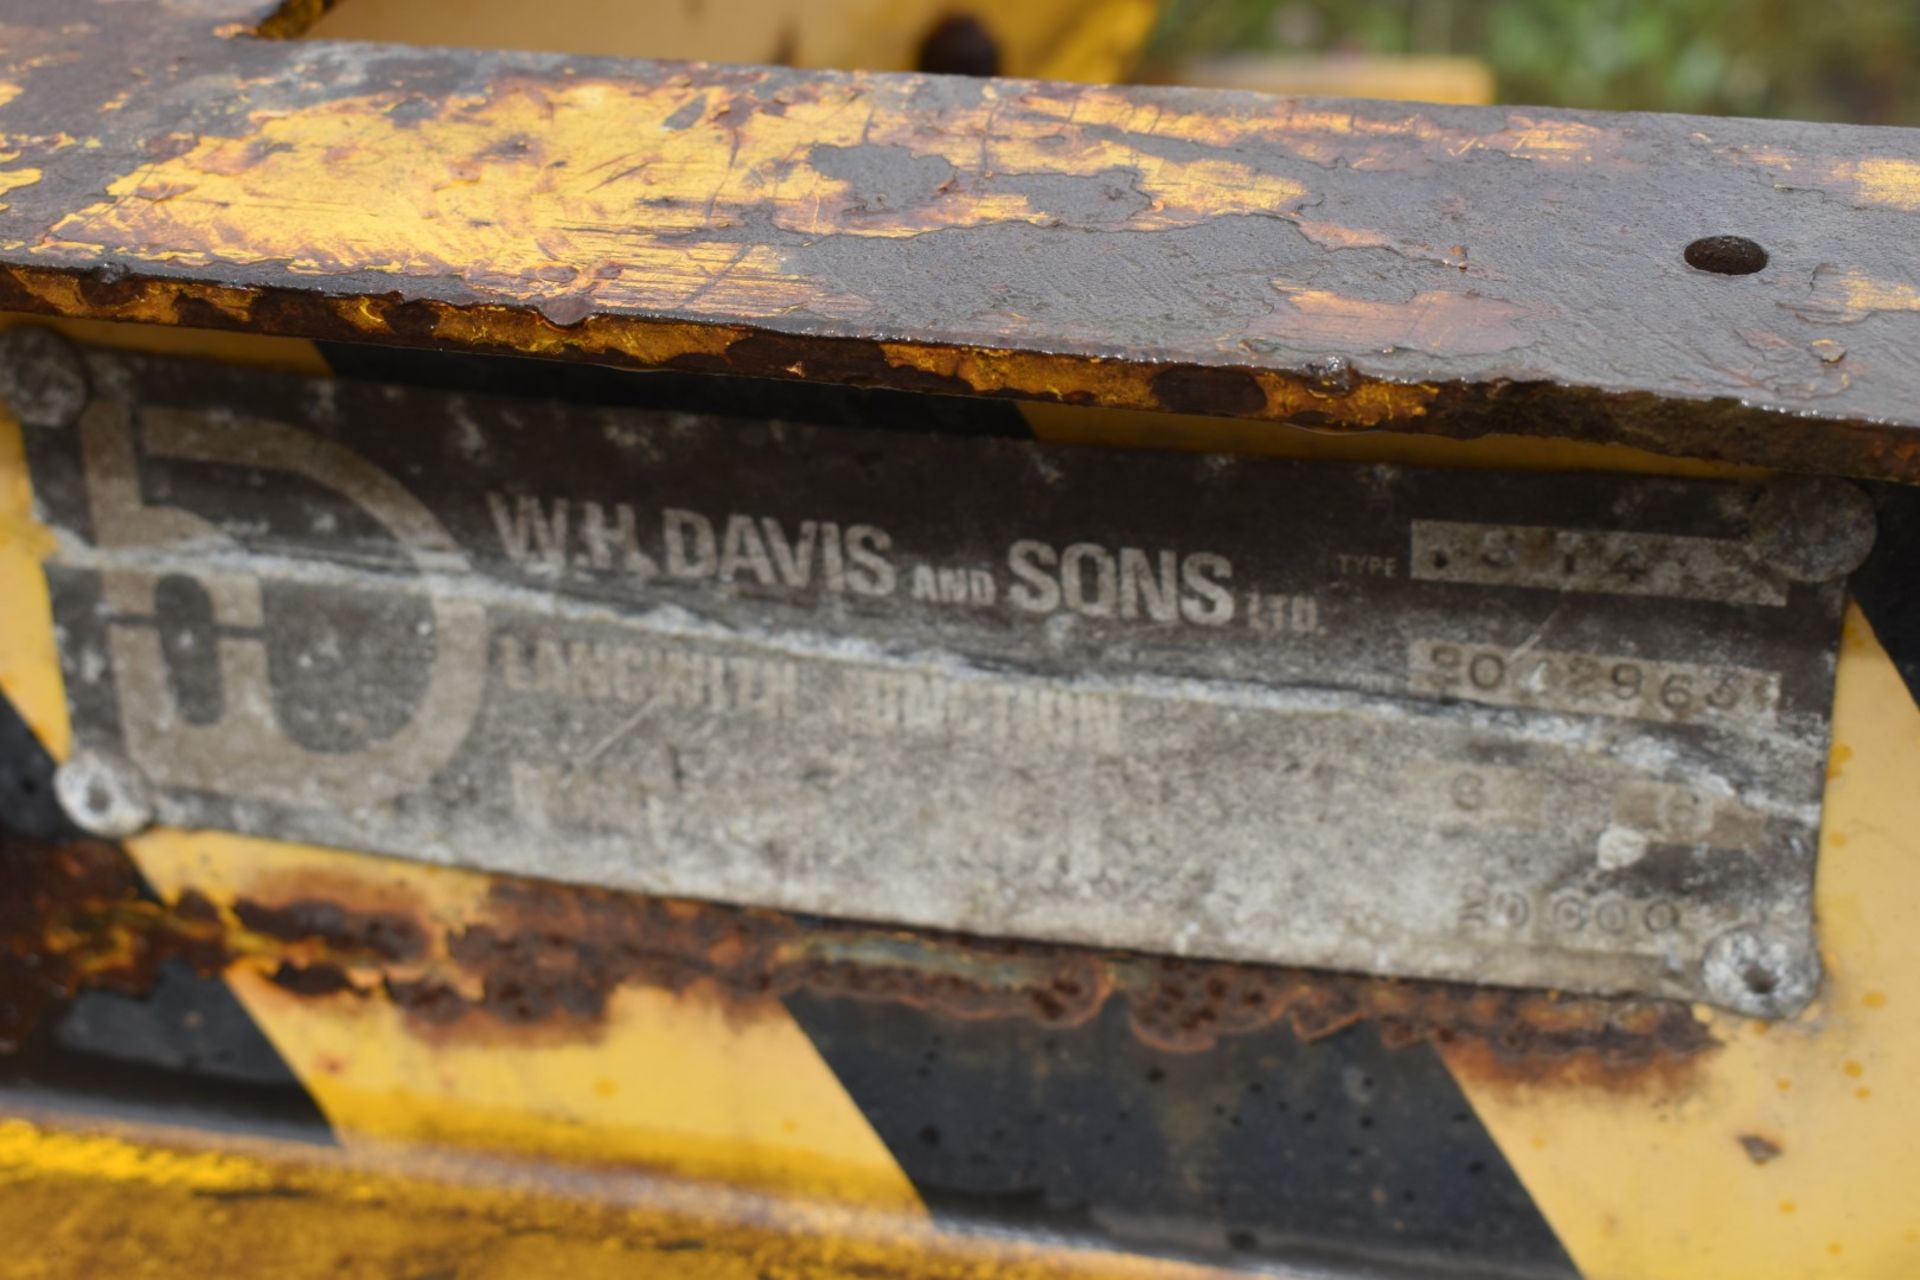 1 x W.H Davis and Sons Industrial 32ft Trailer With Rubber Tyre Wheels - NO VAT ON THE HAMMER! - Image 7 of 9